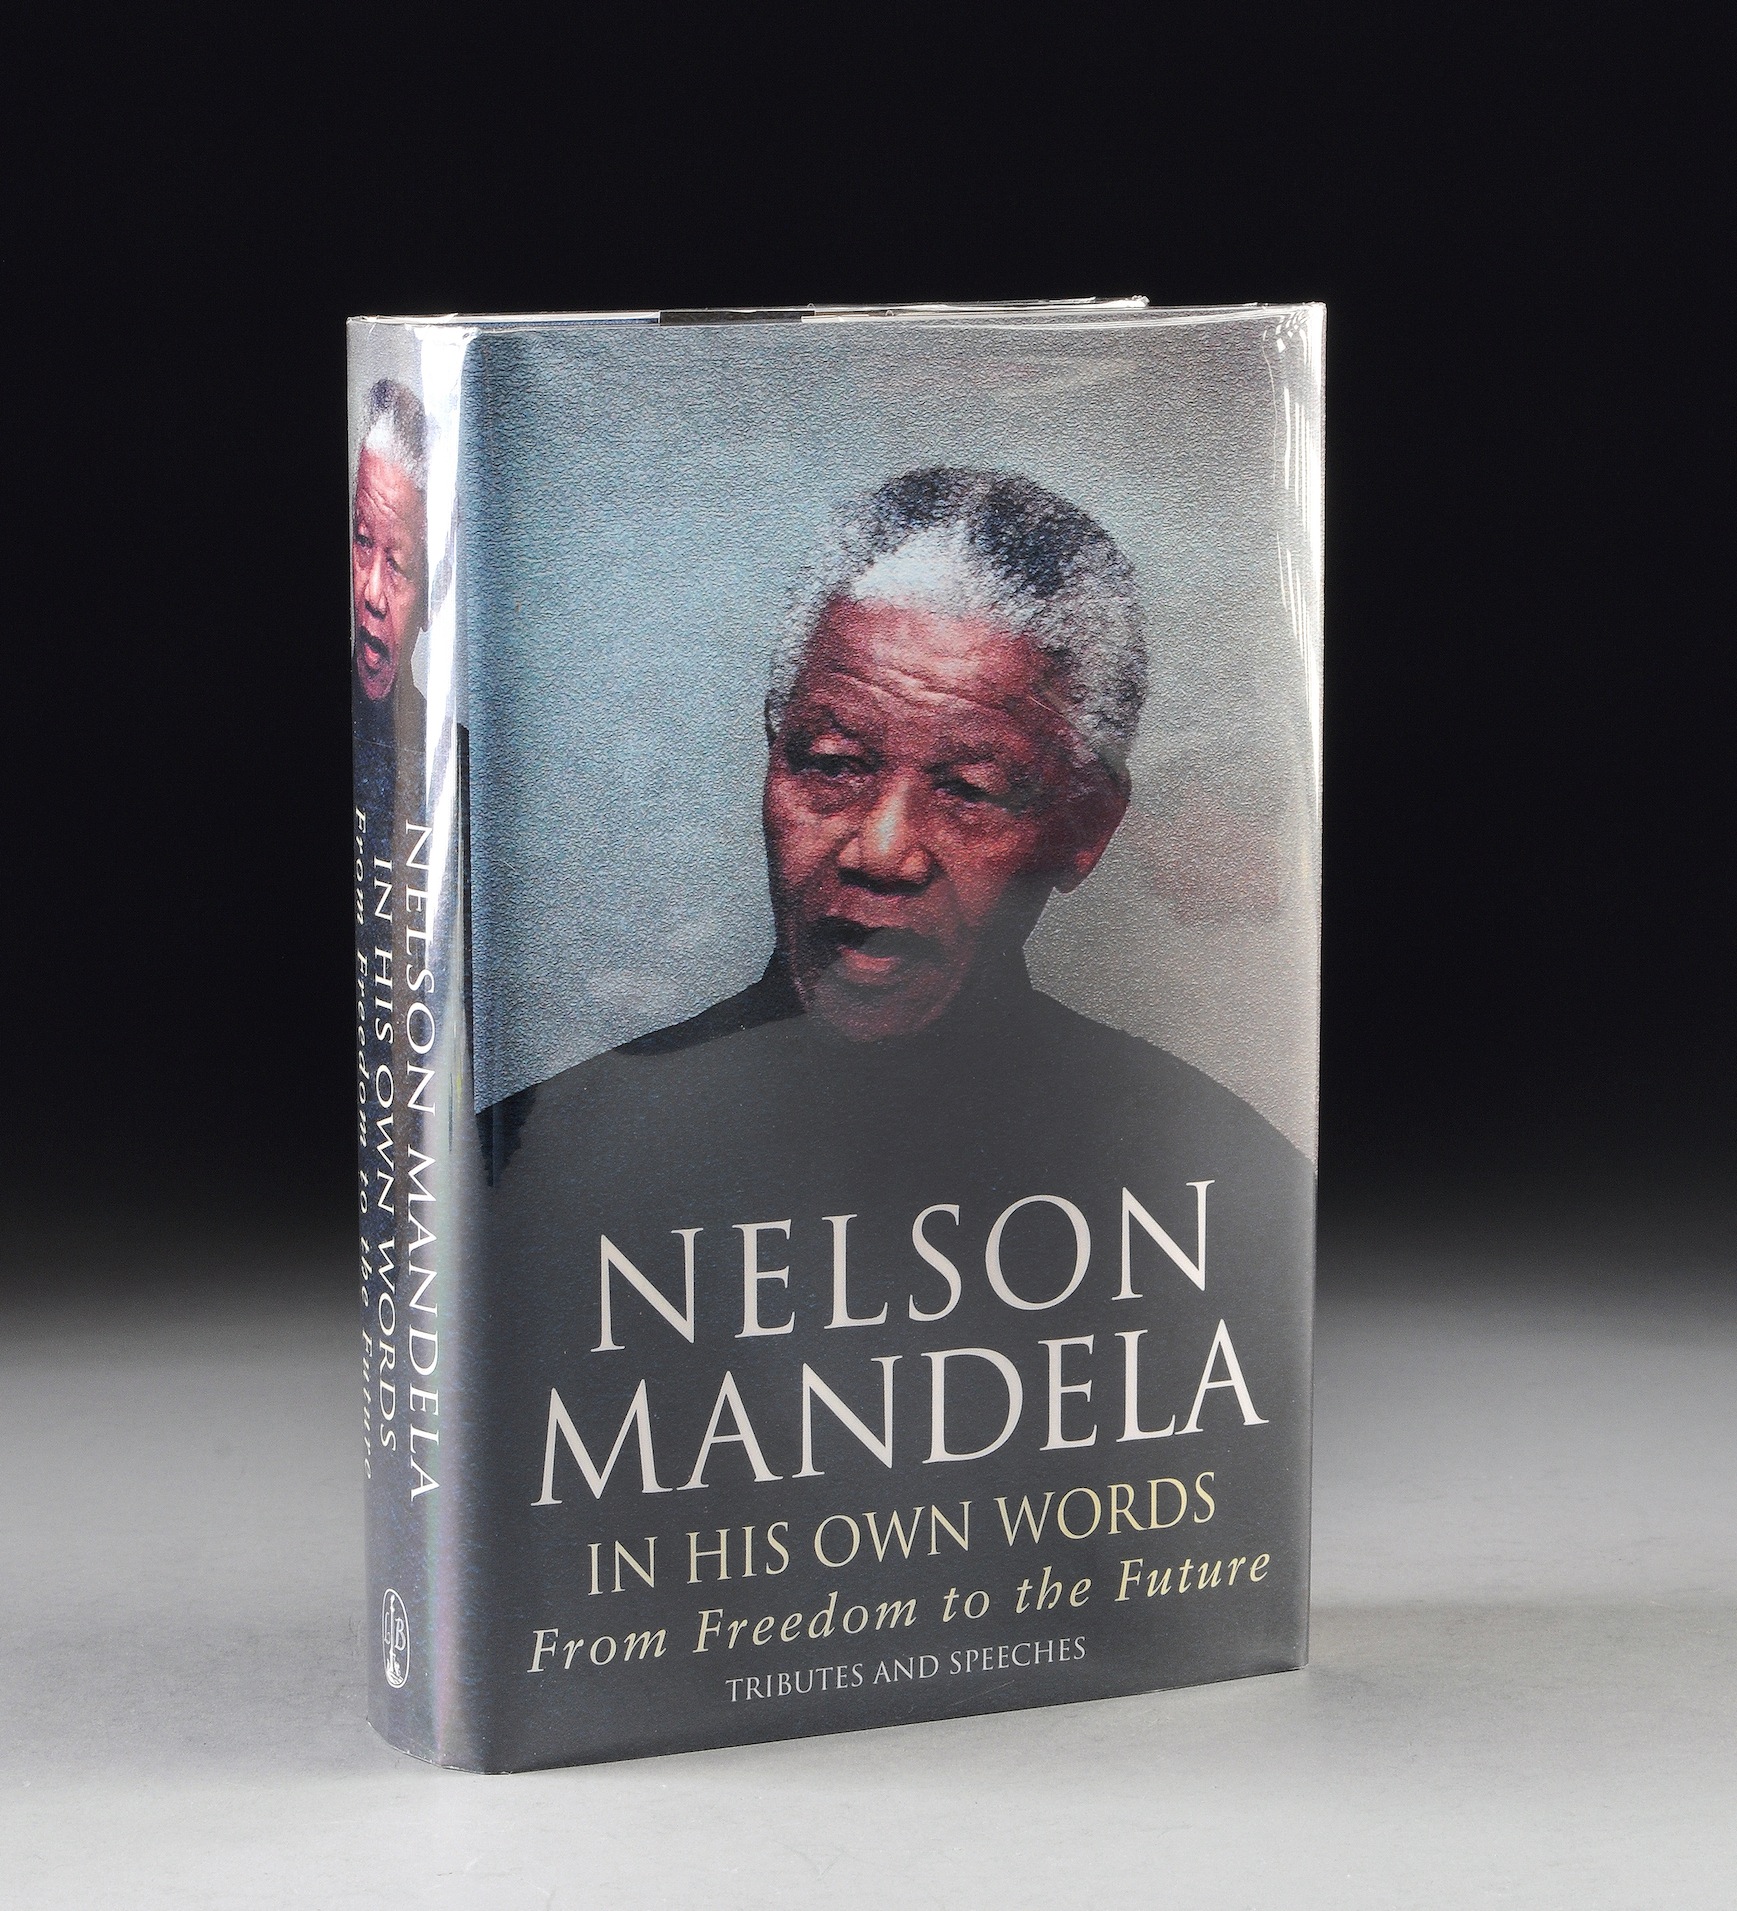 MANDELA, NELSON (B. 1918). In His Own Words: From Freedom to the Future,tributes and speeches